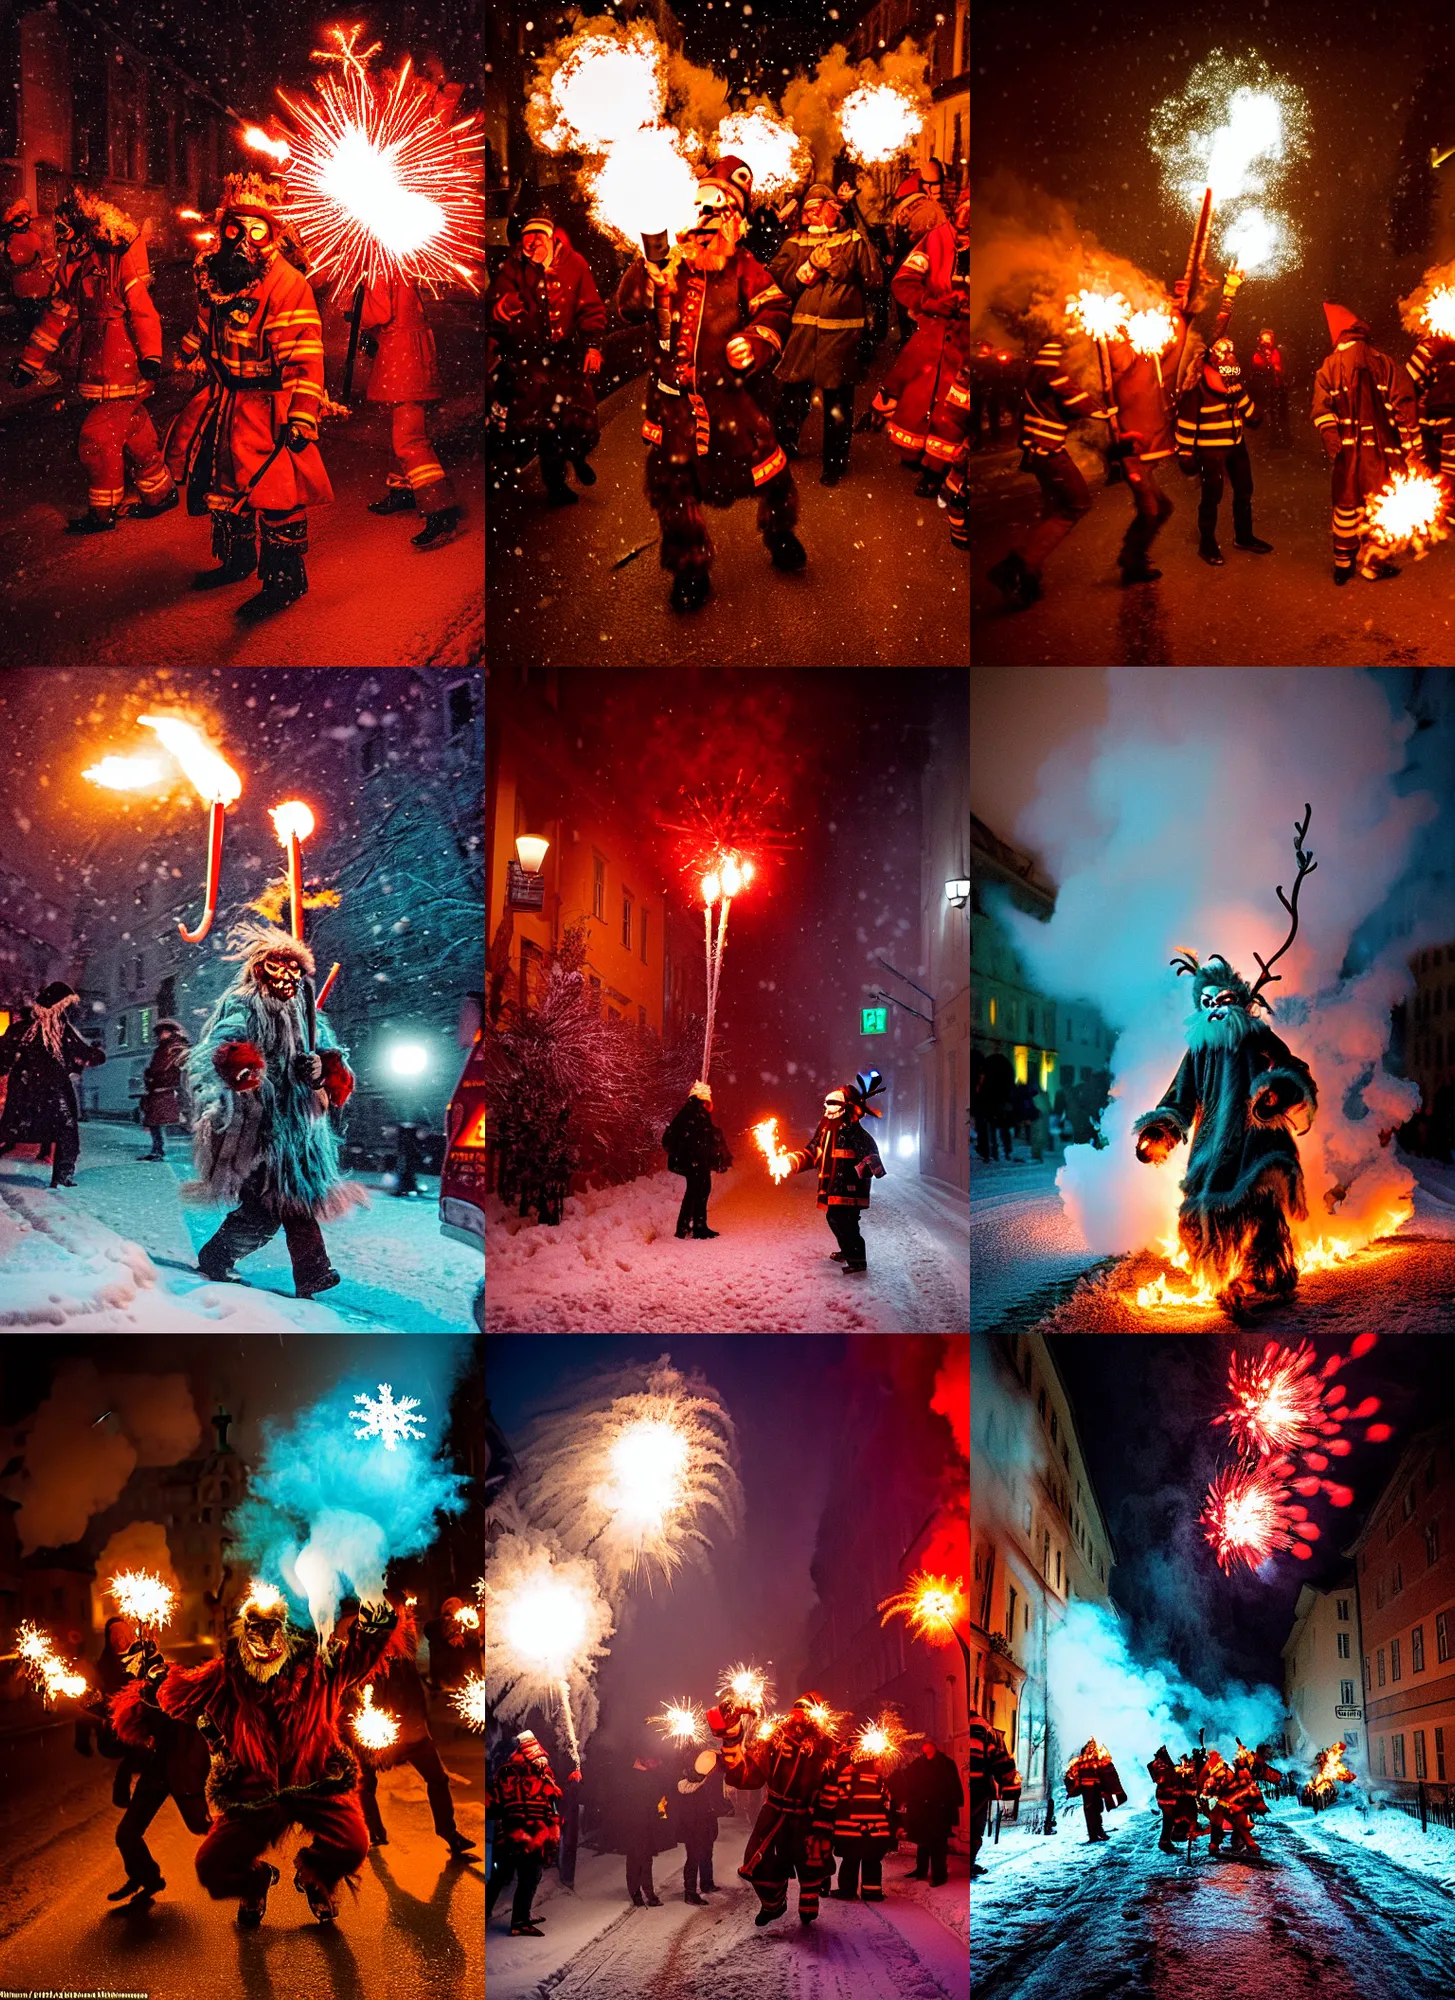 Prompt: kodak portra 4 0 0, winter, snowflakes, hellfire chaos, award winning dynamic photo of a bunch of hazardous krampus between exploding fire barrels by robert capas, motion blur, in a narrow lane in salzburg at night with colourful pyro fireworks and torches, teal lights